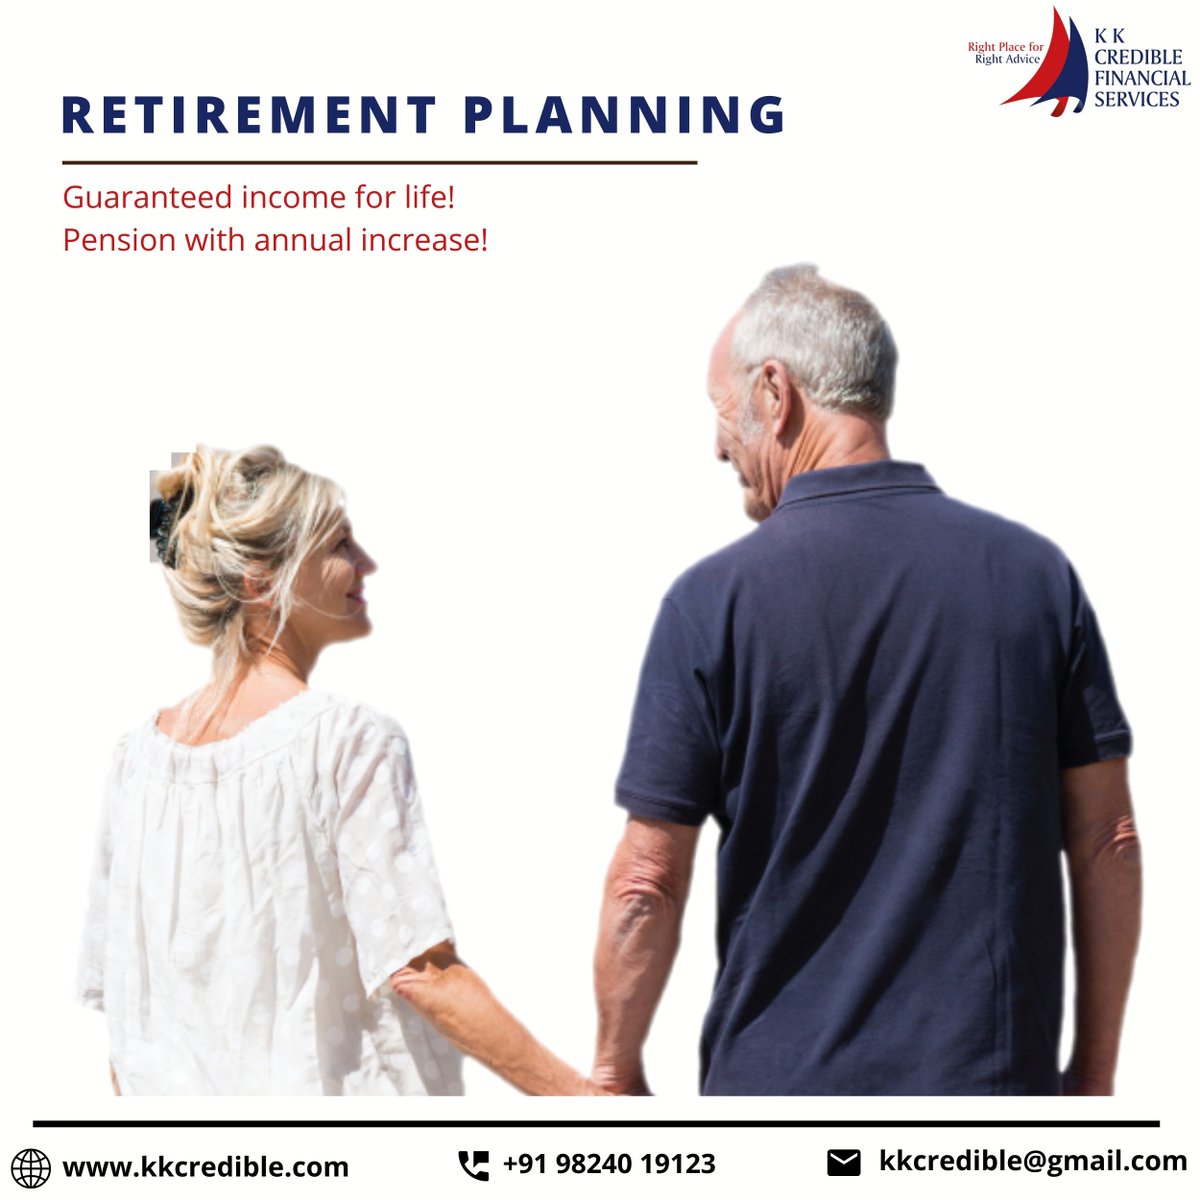 Plan your Retirement finance with us.
Guaranteed income for life! 

Know More @ bit.ly/2BKk9ai
Call us at +91 9824019123

#RetirementPlanningServices #FixedDeposit #Investment #SIP #TaxFree #CapitalGain #MutualFund #FinancialPlanningAdvisory #KKCredible #Rajkot